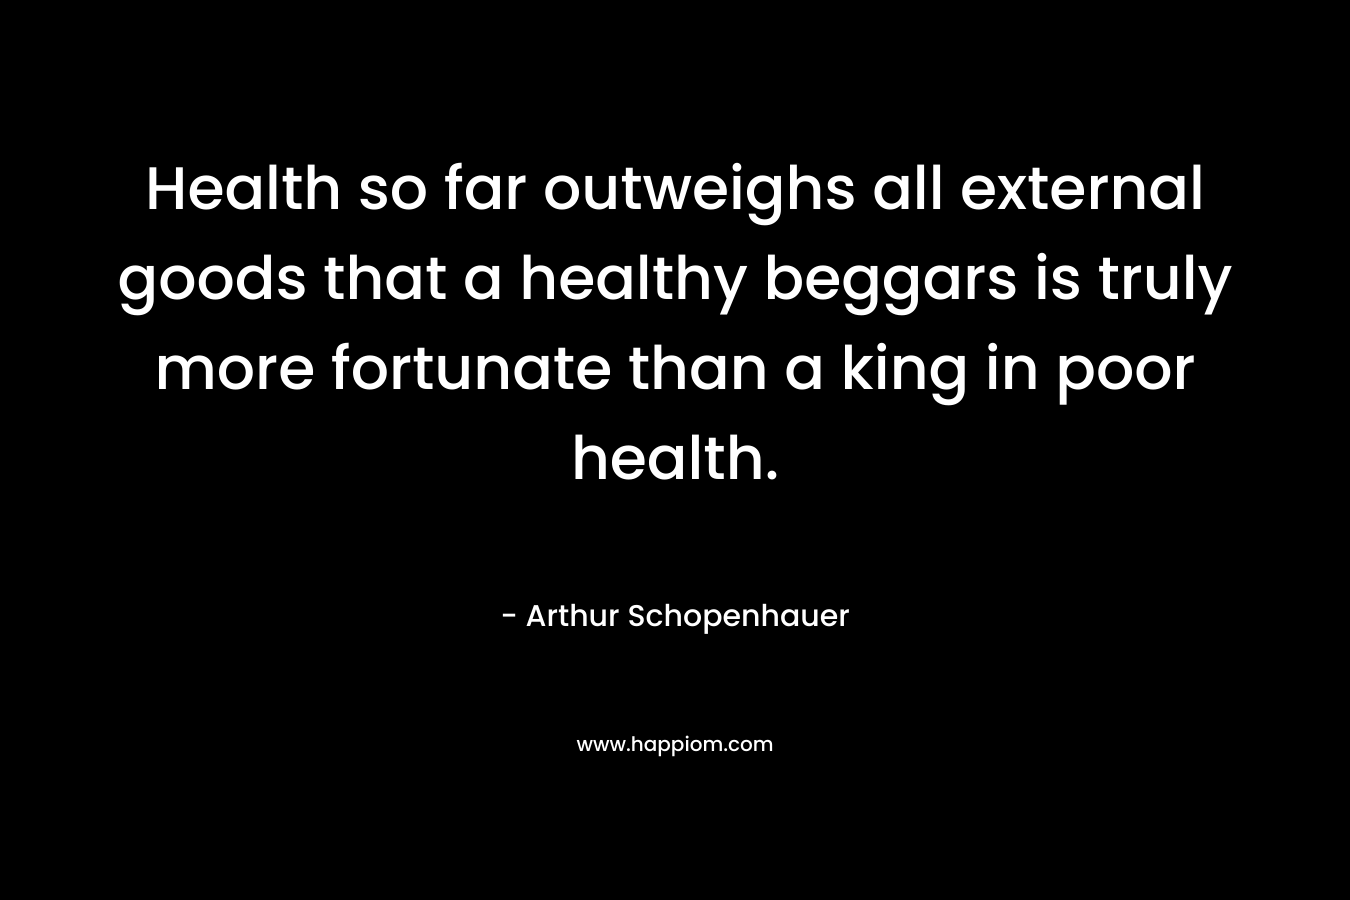 Health so far outweighs all external goods that a healthy beggars is truly more fortunate than a king in poor health. – Arthur Schopenhauer